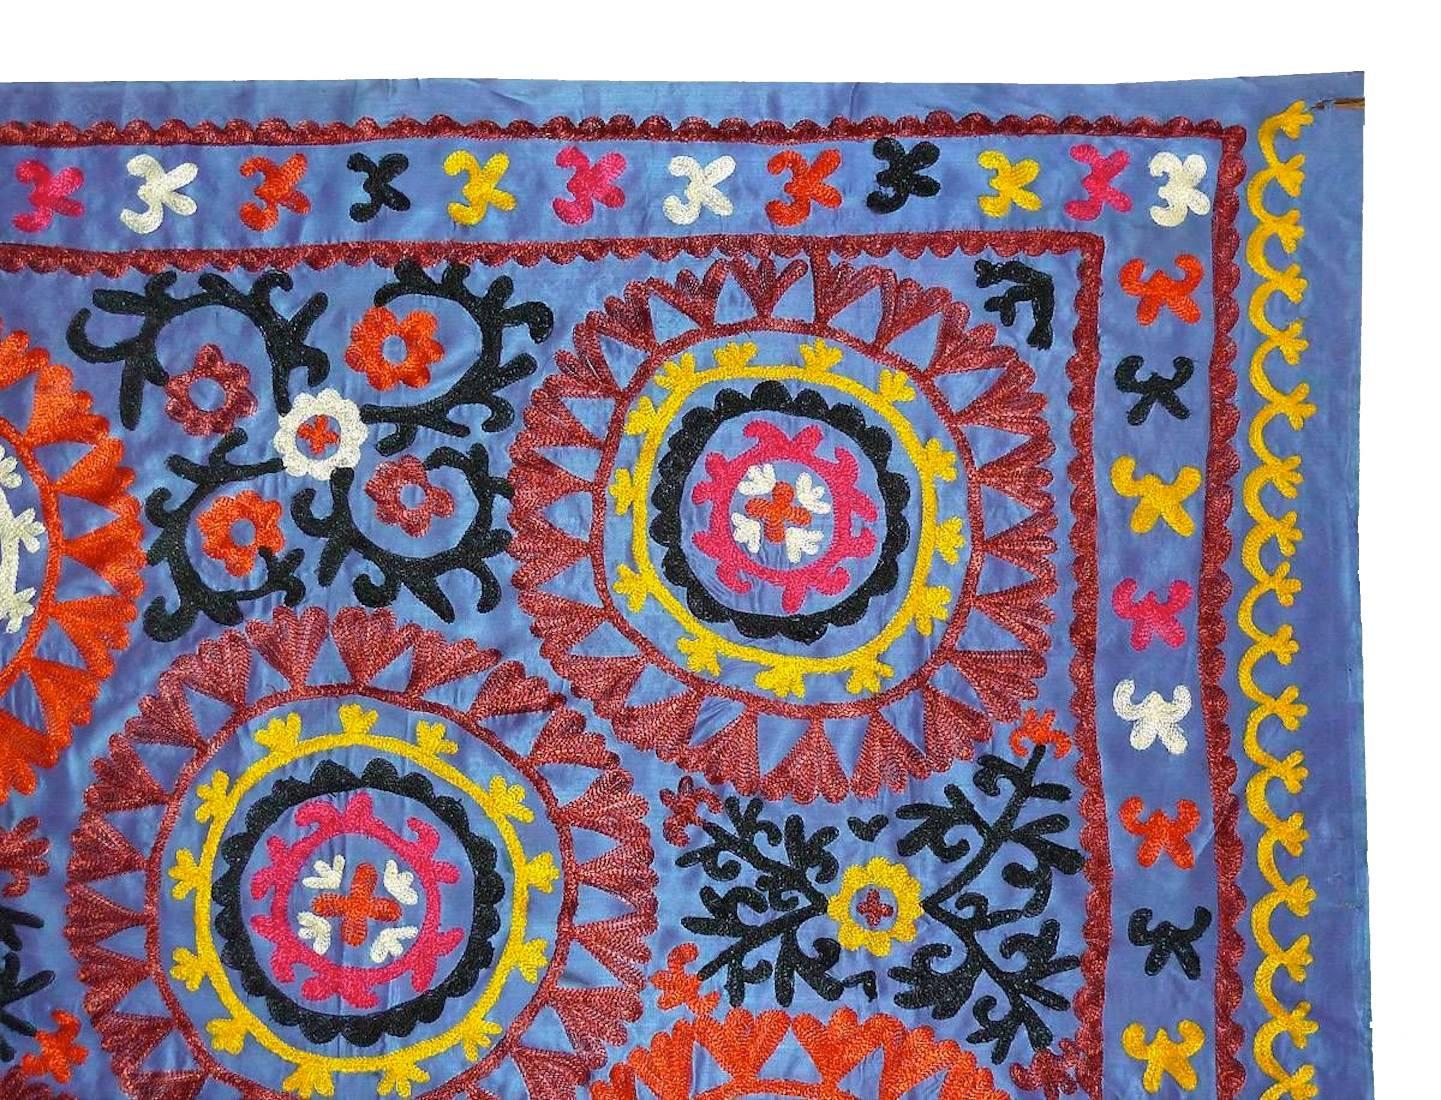 Large Uzbek embroidered Suzani light blue silk background with silk embroidery. This extraordinary textile measures 60" x 50" and is in good vintage condition.